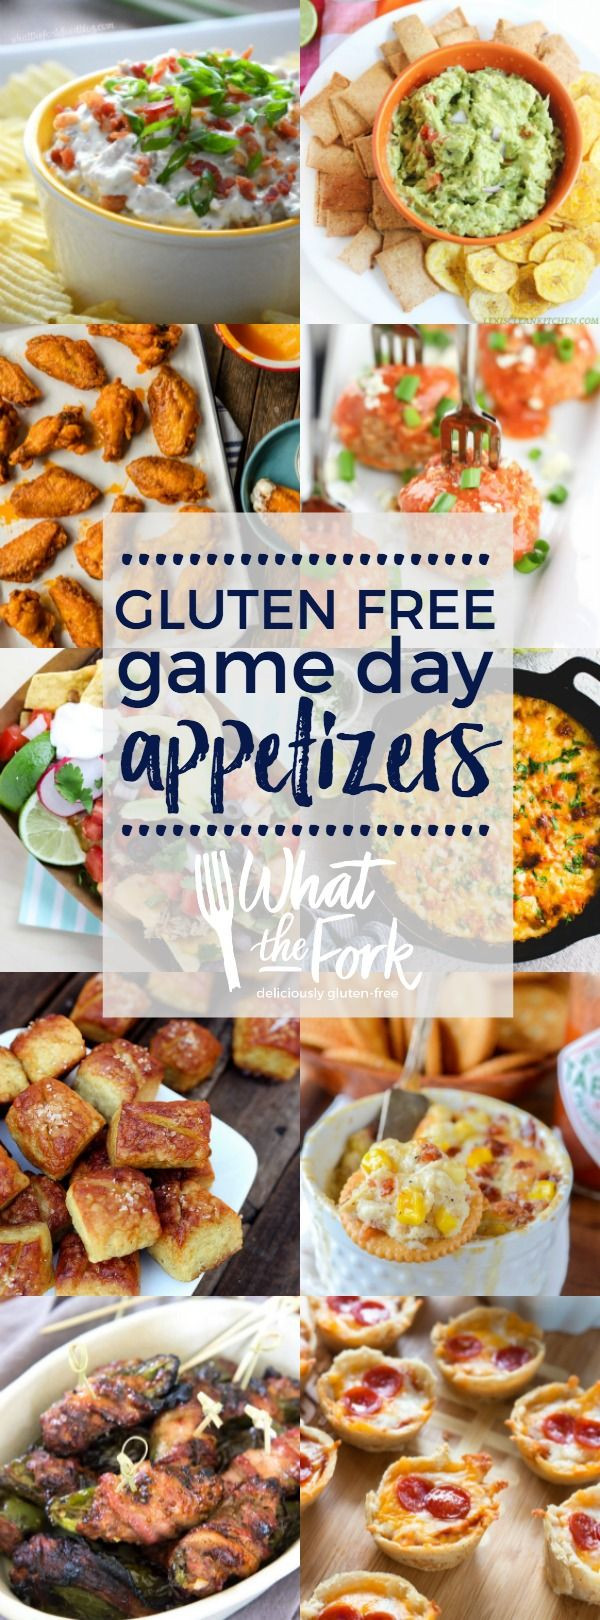 Gluten Free Appetizers For Parties
 Gluten Free Game Day Appetizers